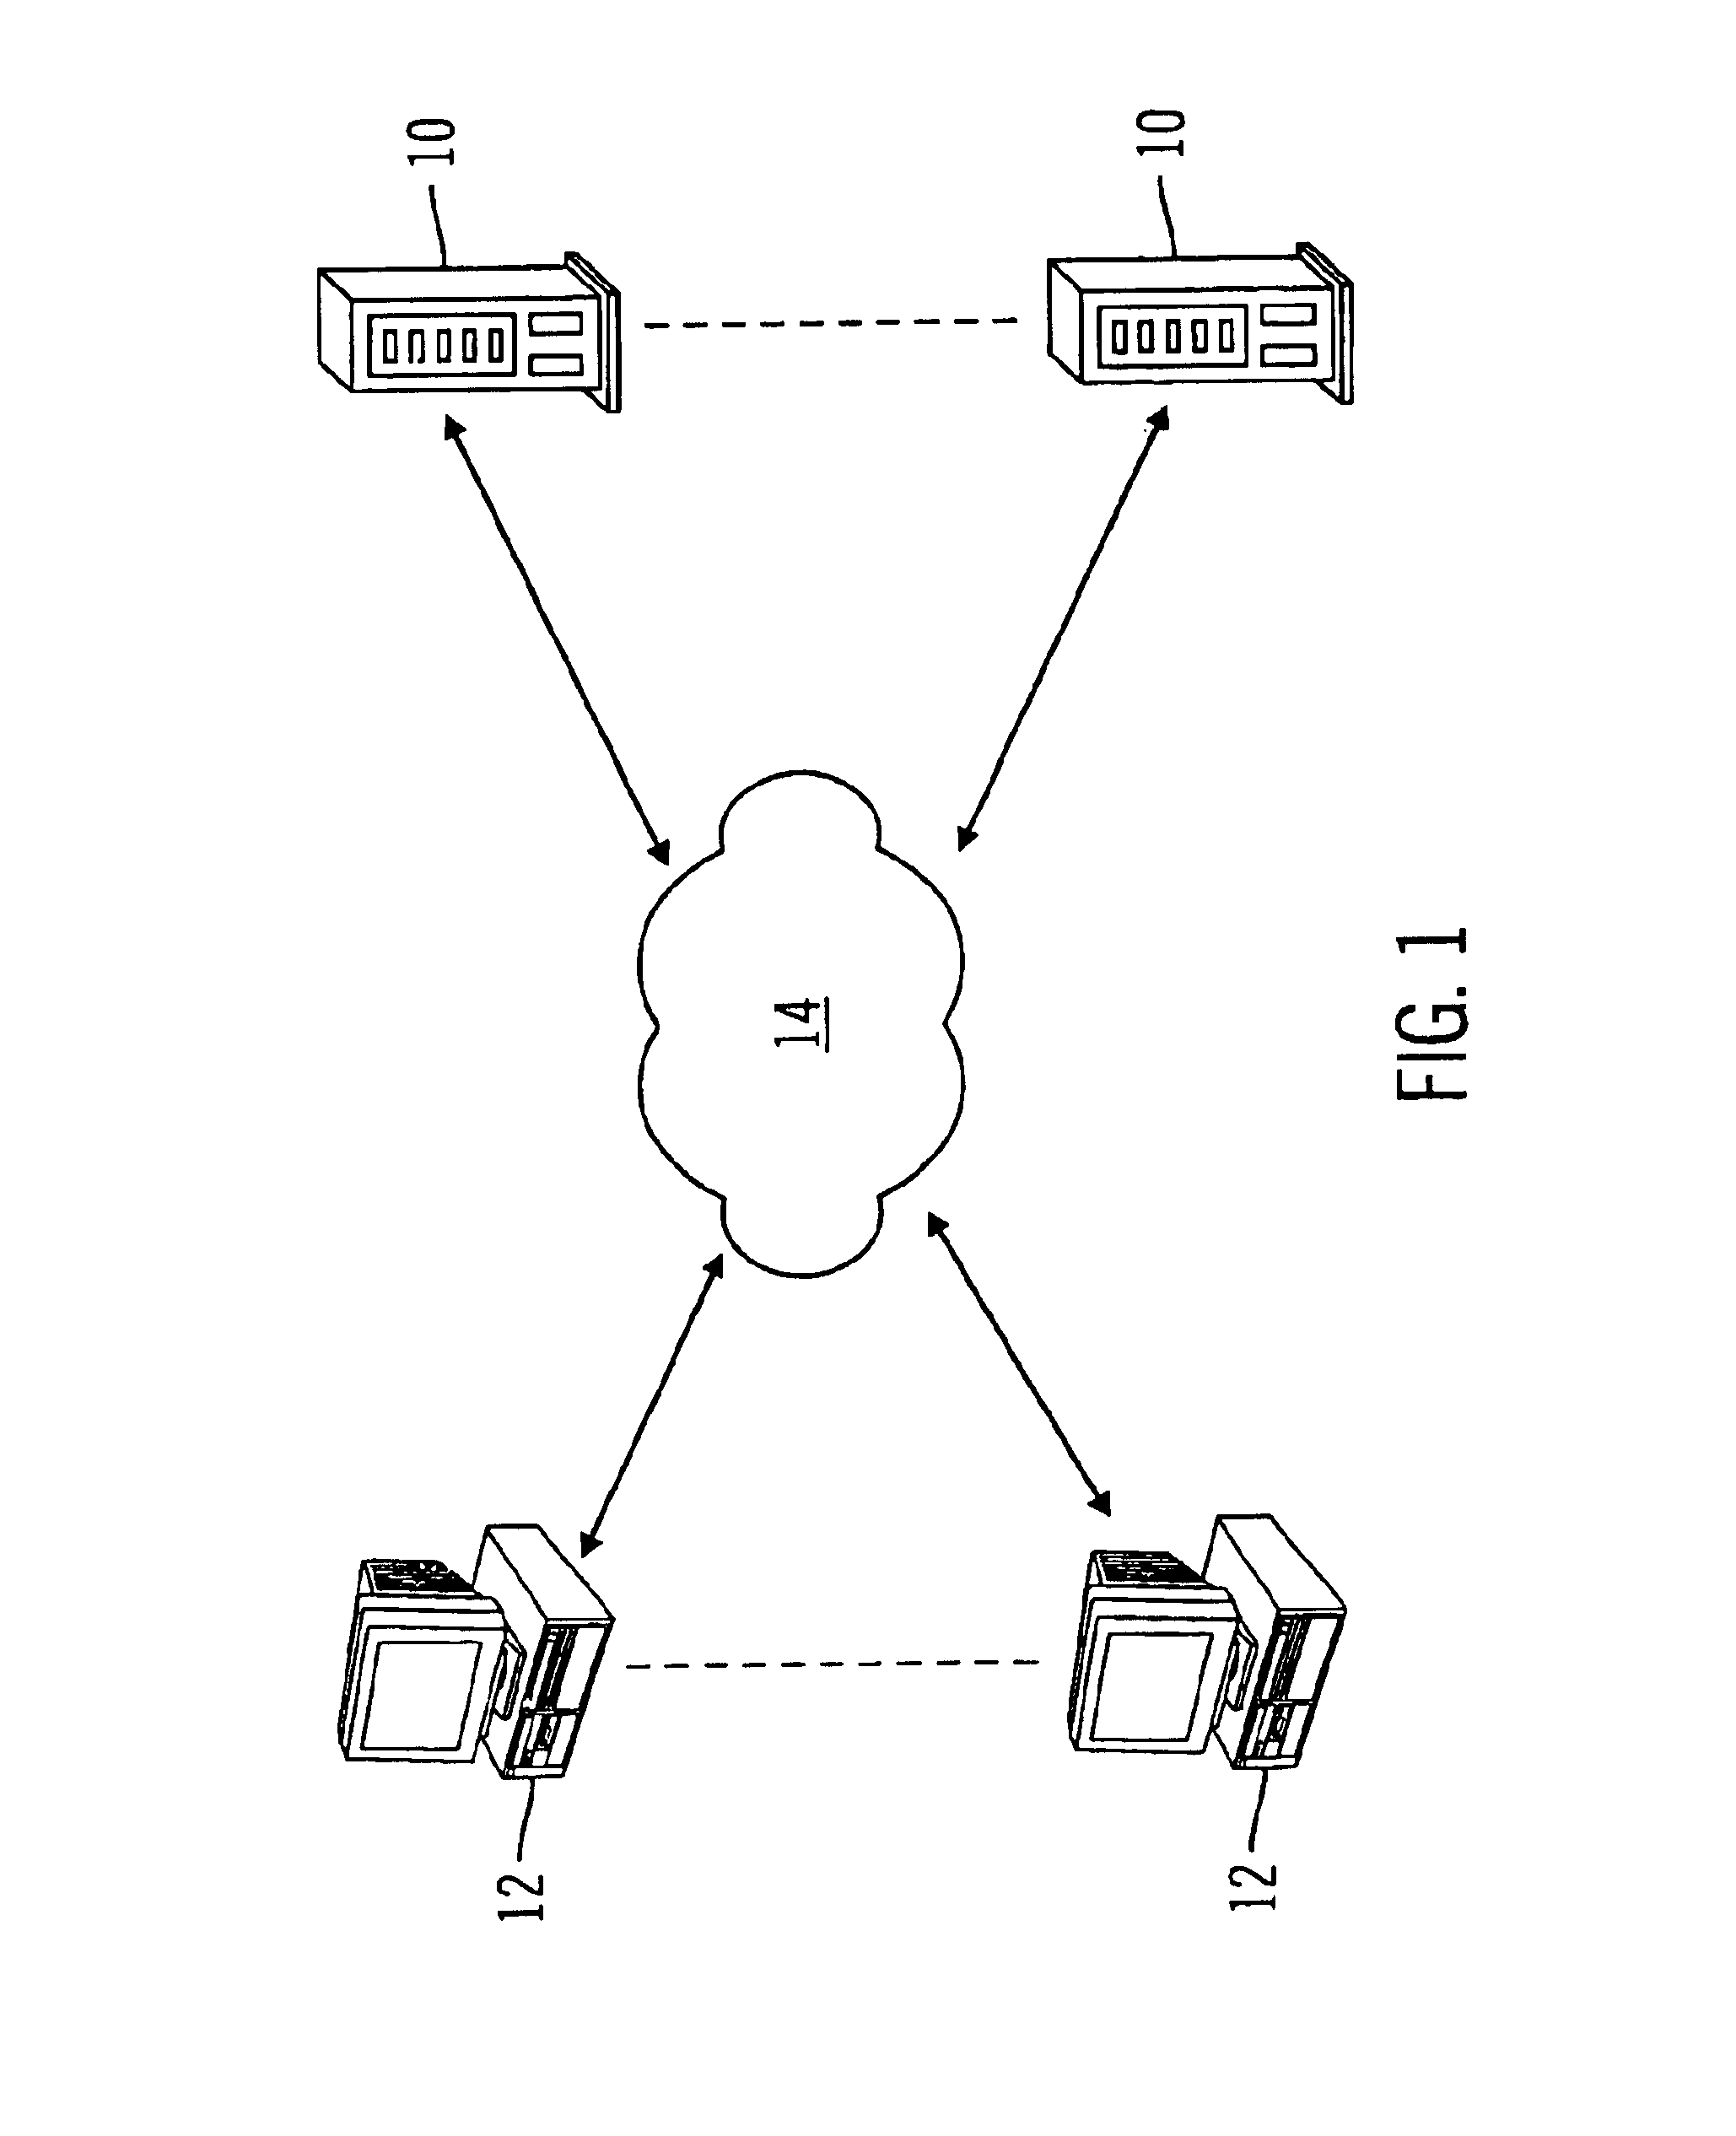 Web-based client/server communication channel with automated client-side channel endpoint feature detection and selection